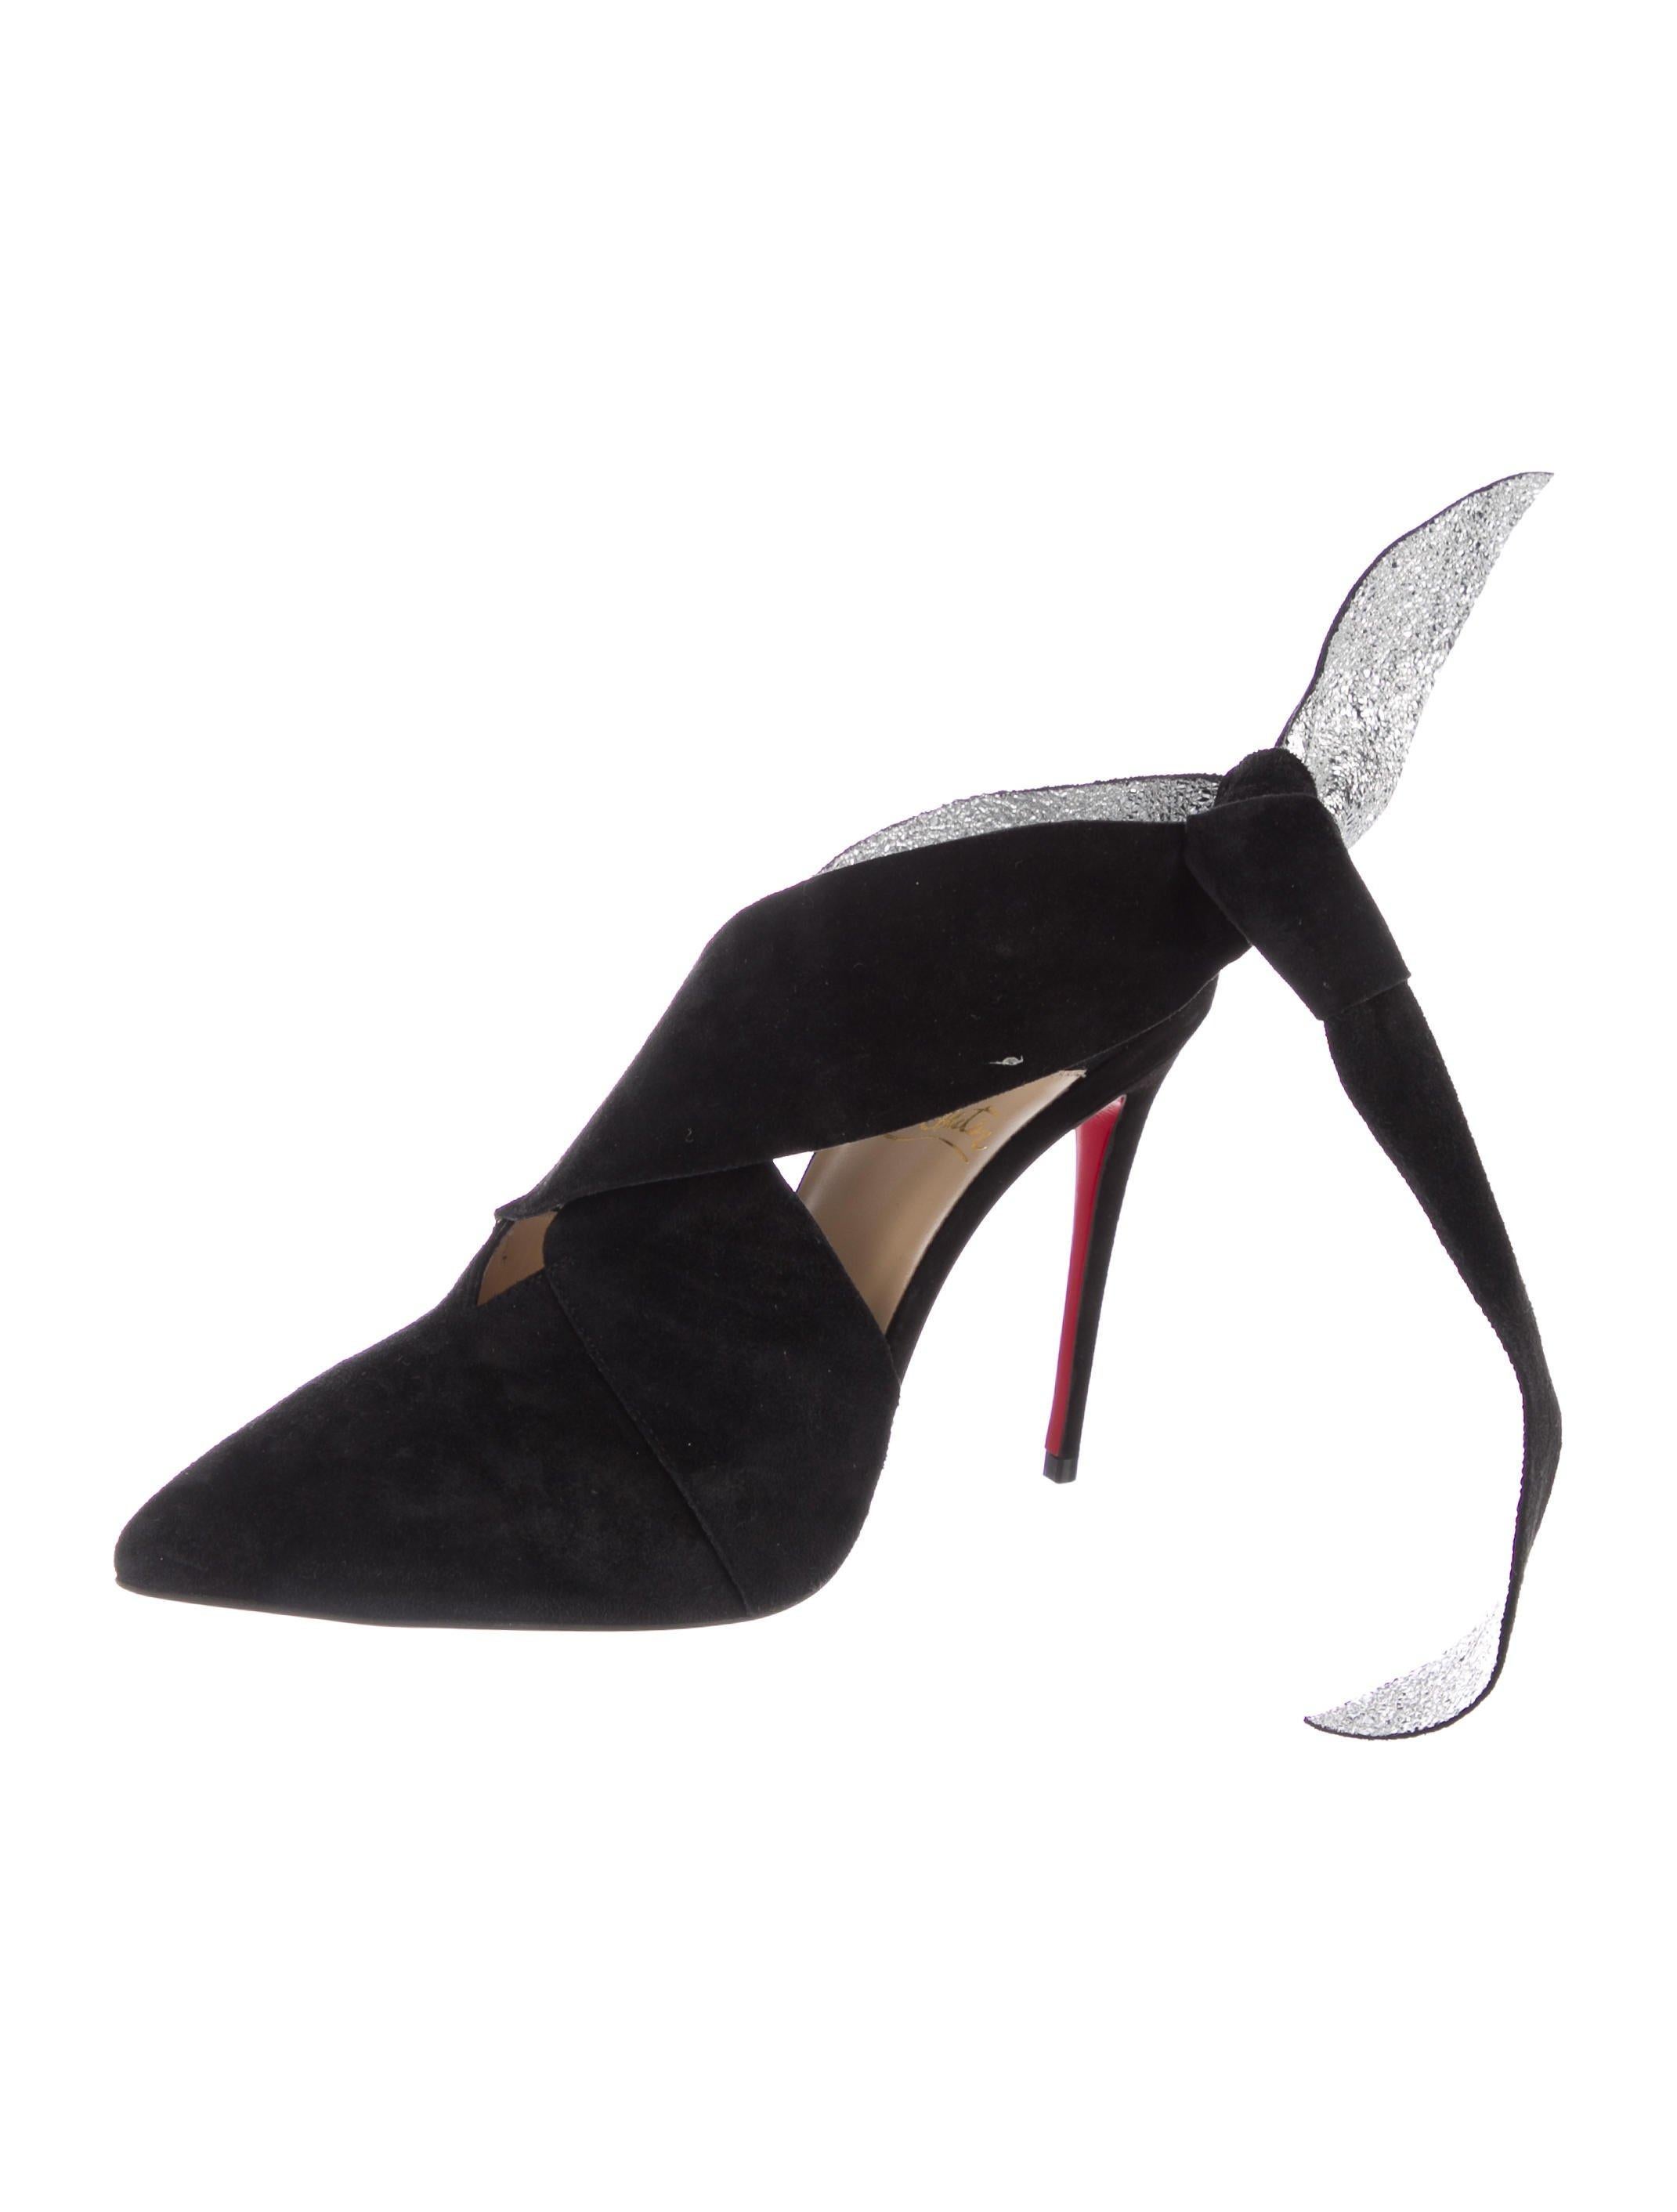 Christian Louboutin NEW Black Suede Silver Tie Evening Ankle Heels Booties Boots

Size IT 36.5
Suede
Leather
Tie closure
Made in France
Heel height 4.25